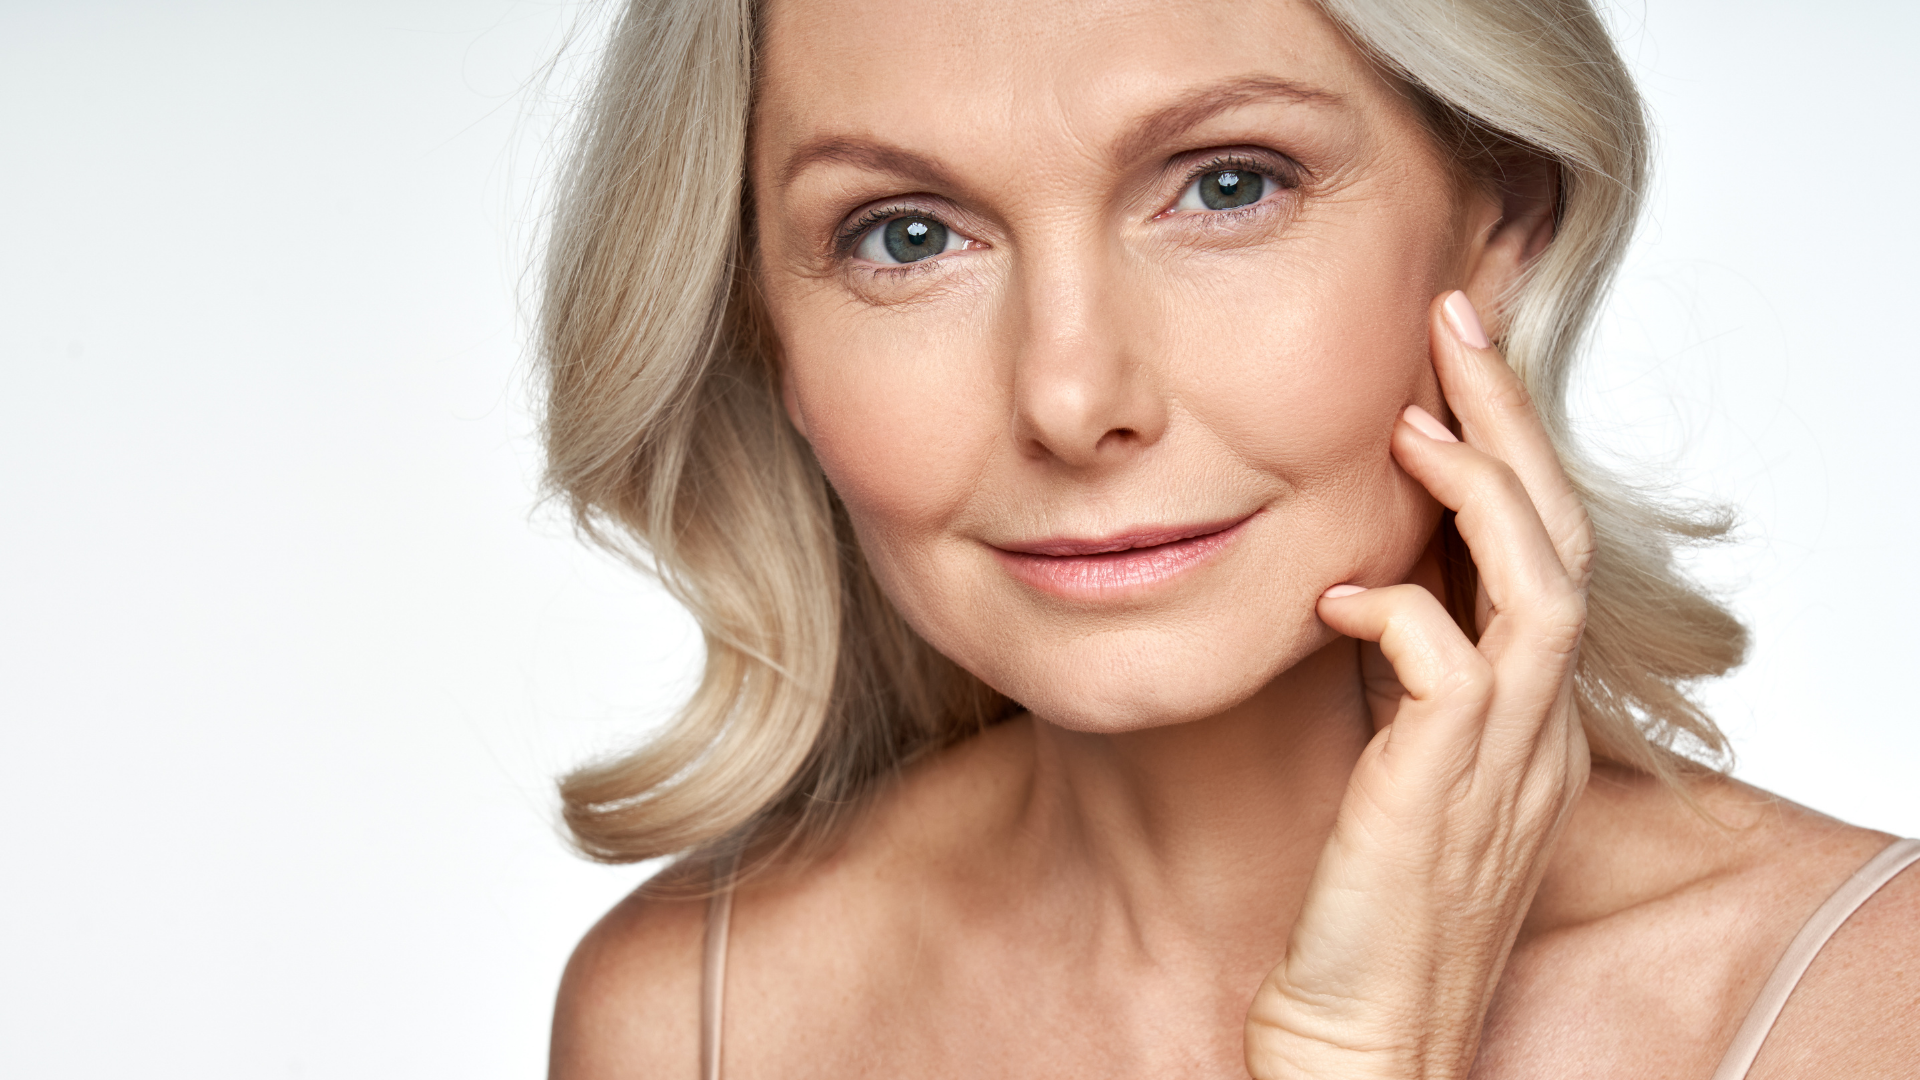 6 Simple and Natural Ways to Improve Your Skin & Remove Age Spots